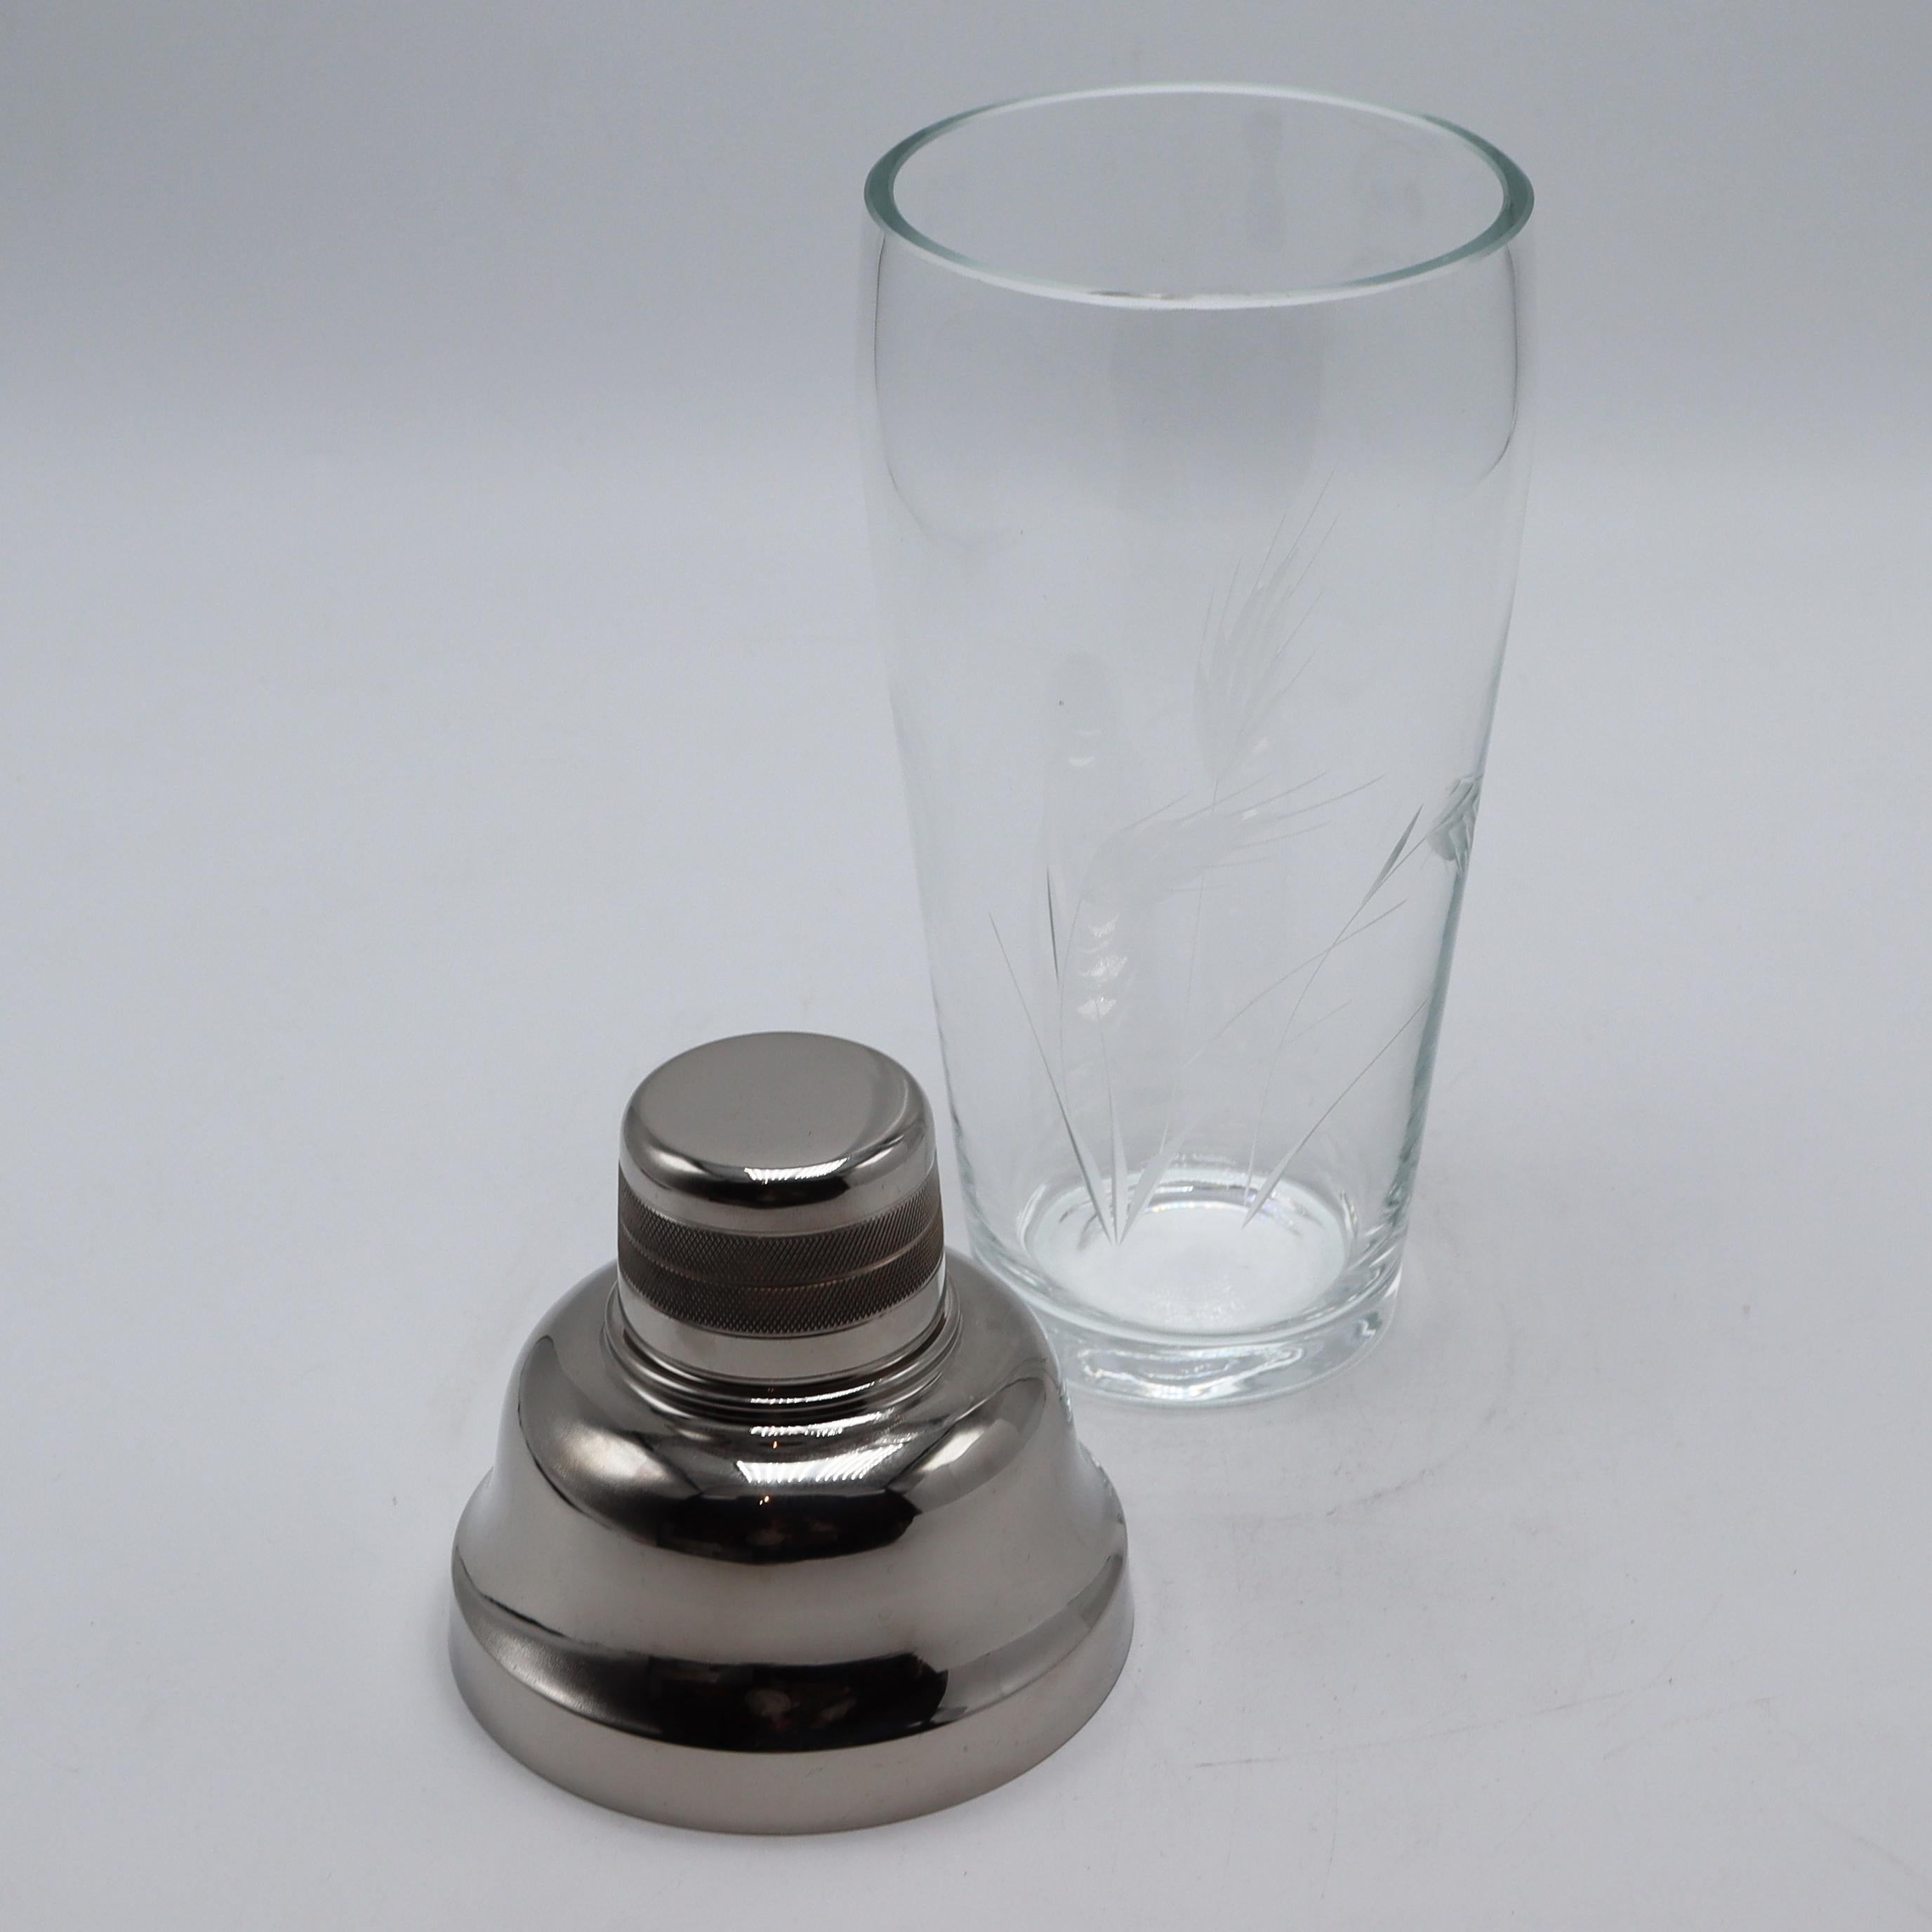 Mid-20th Century Vintage Glass Cocktail Shaker, c. 1950